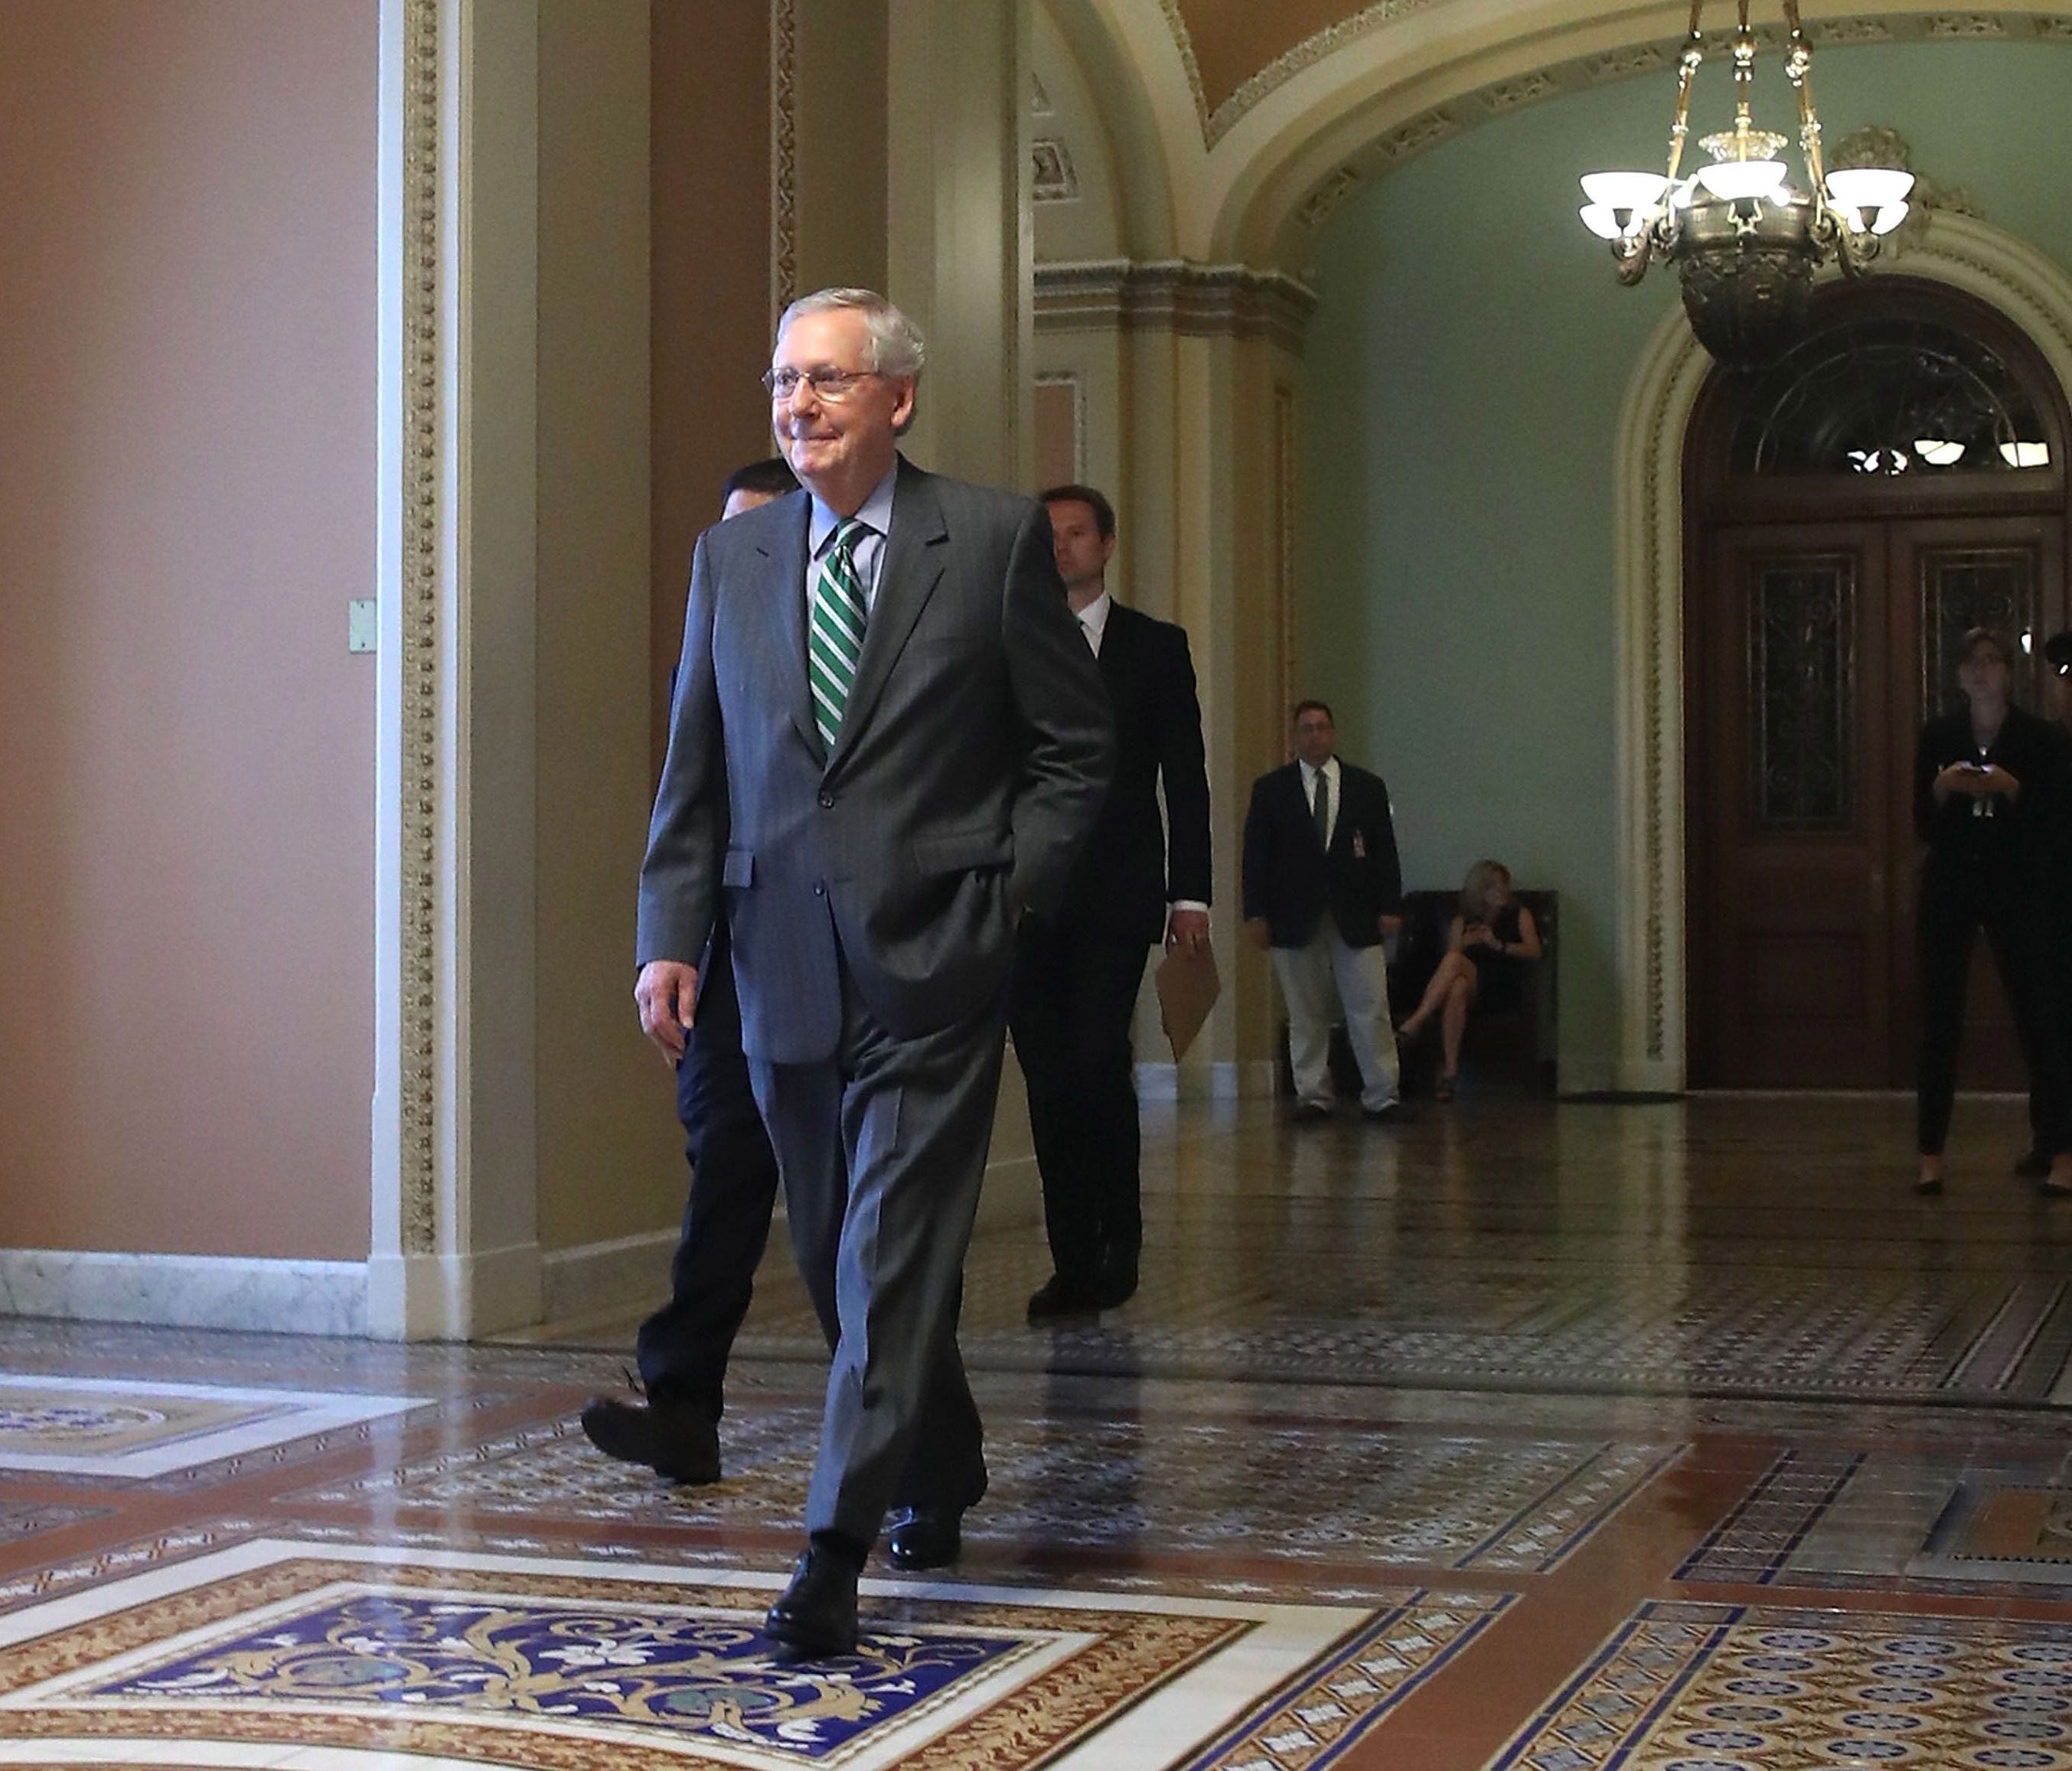 Senate Majority Leader Mitch McConnell (R-KY) walks to his office on Capitol Hill on June 22, 2017 before Senate Republicans released their version of the House-passed health care bill.